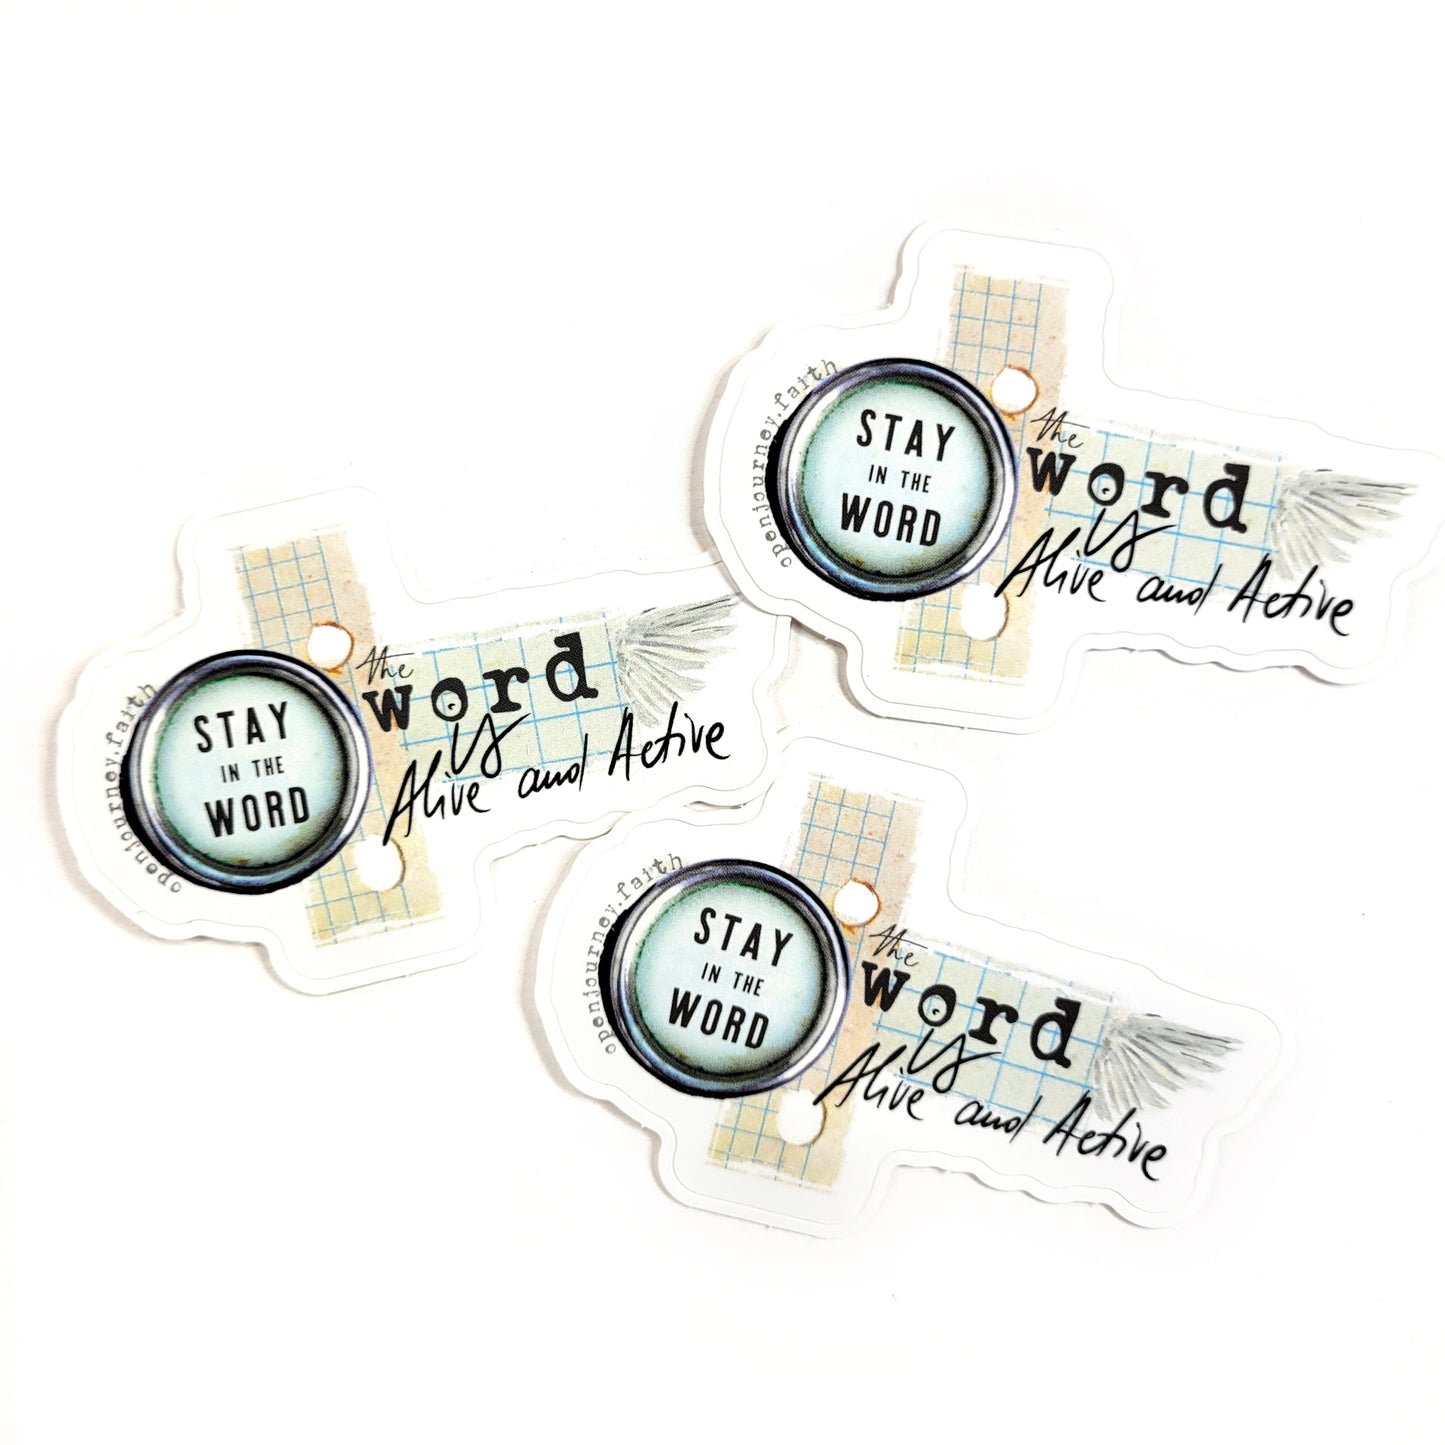 Stay in the Word- faith sticker